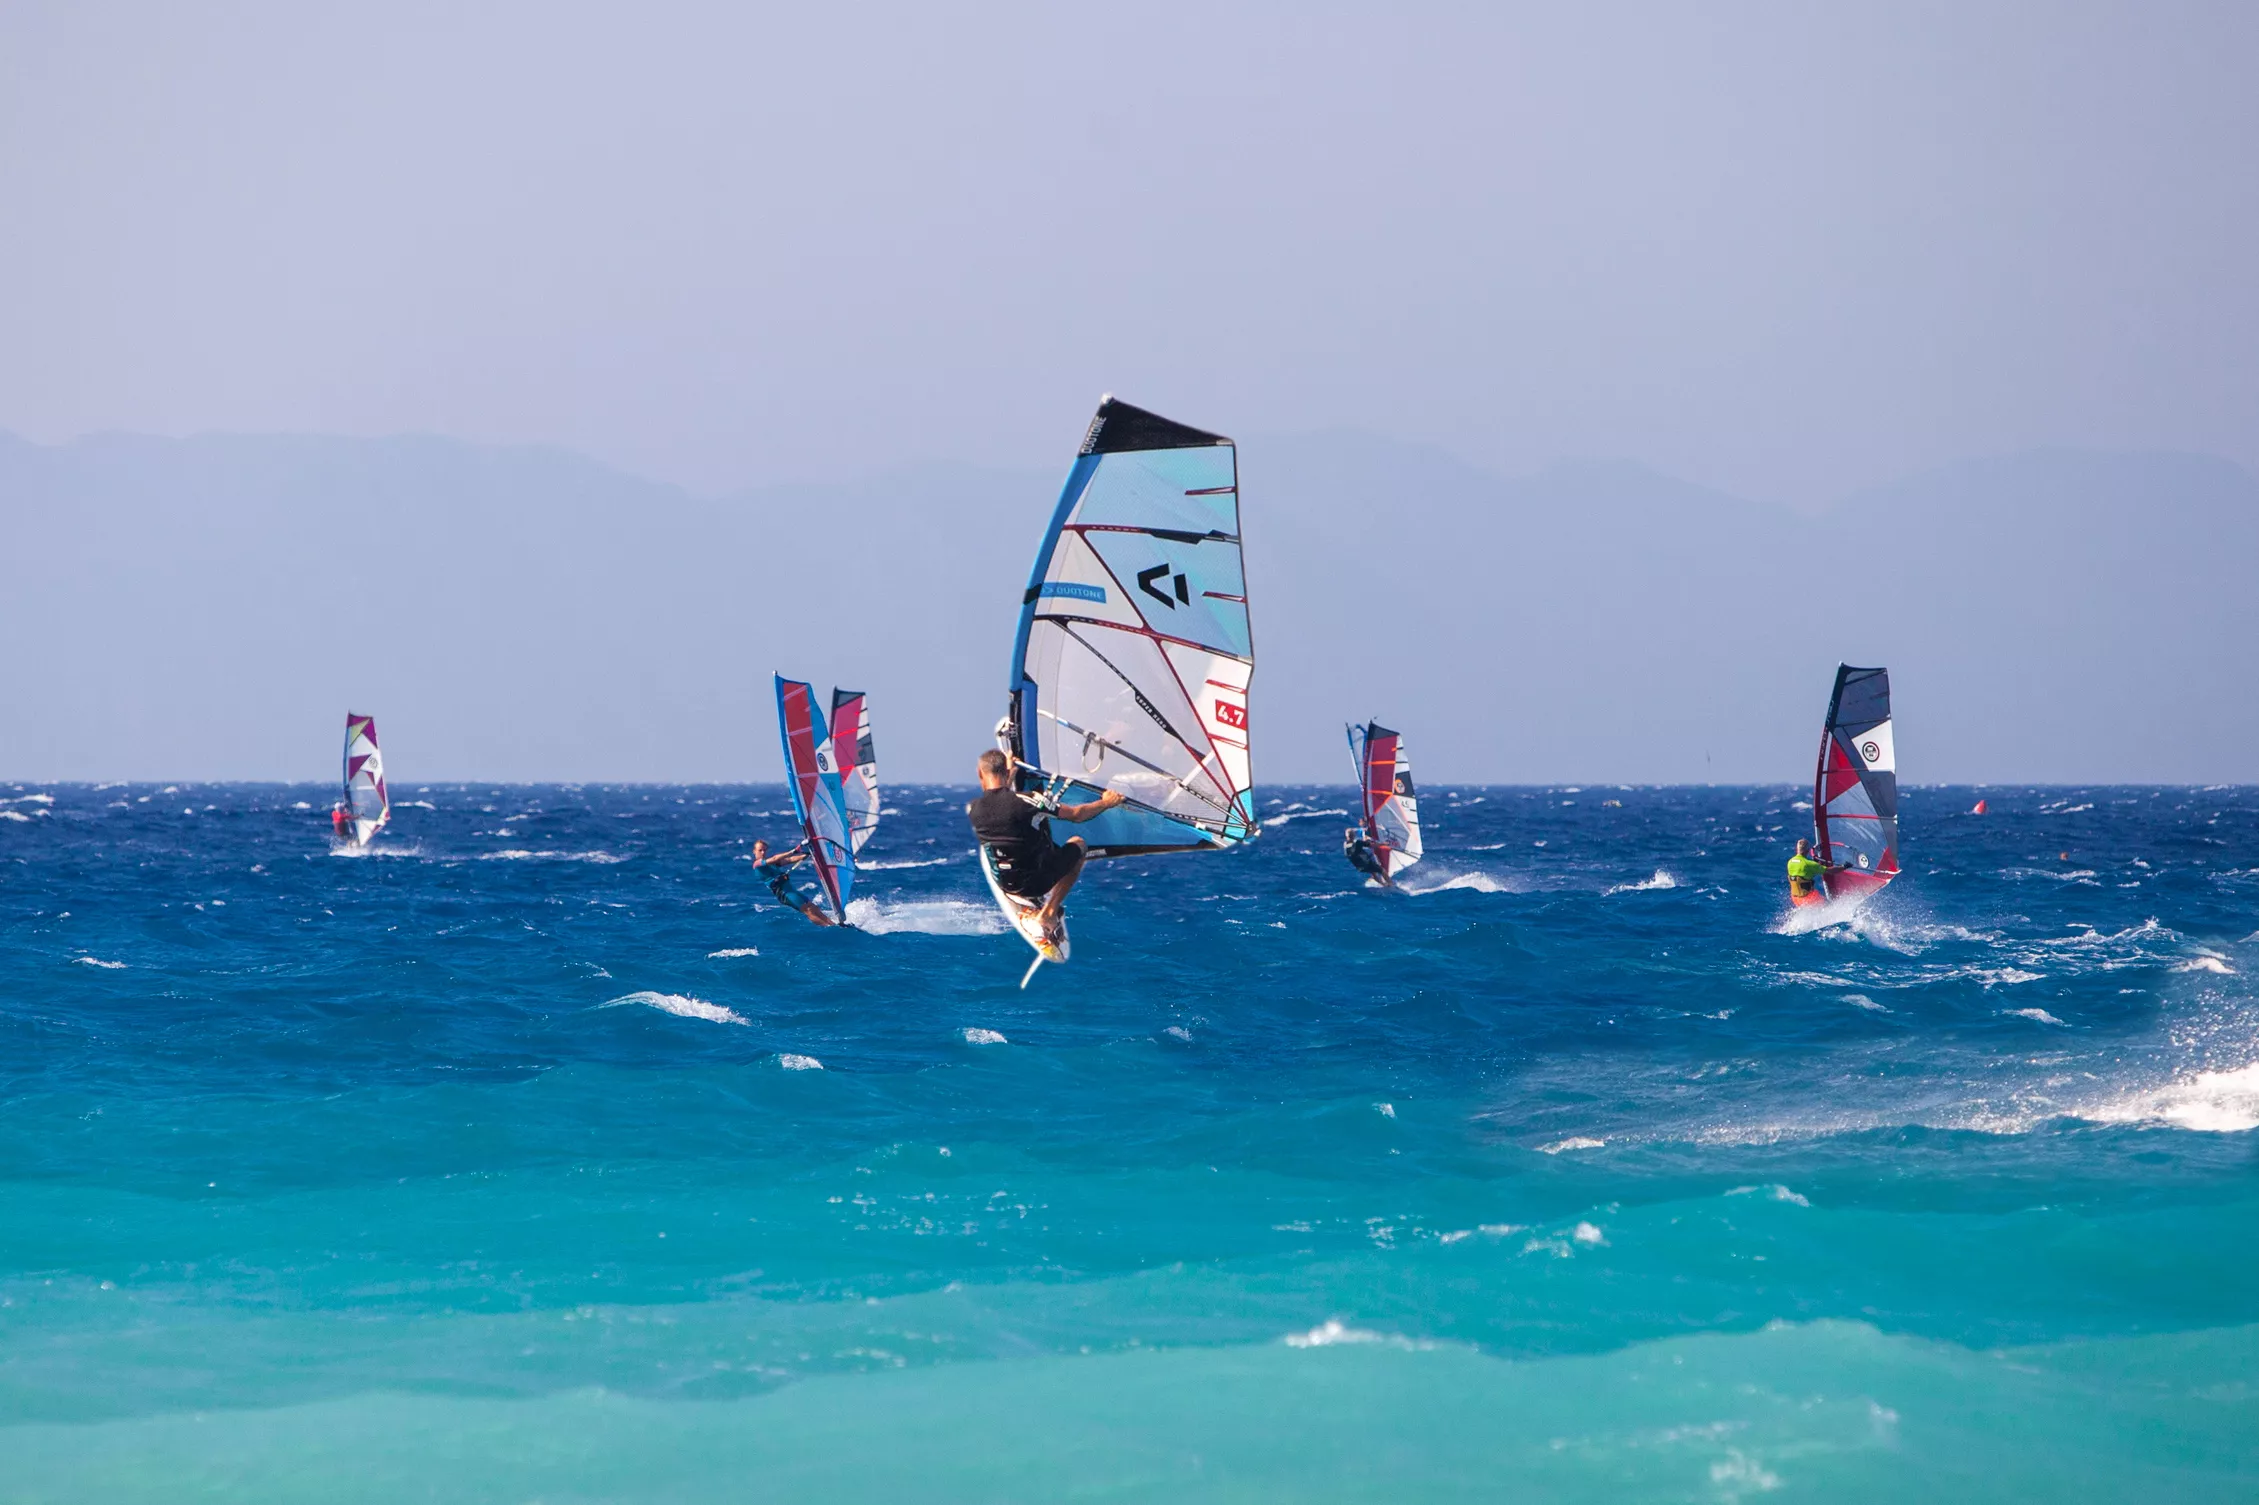 Pro Center Rhodos in Greece, Europe | Surfing,Windsurfing - Rated 1.7